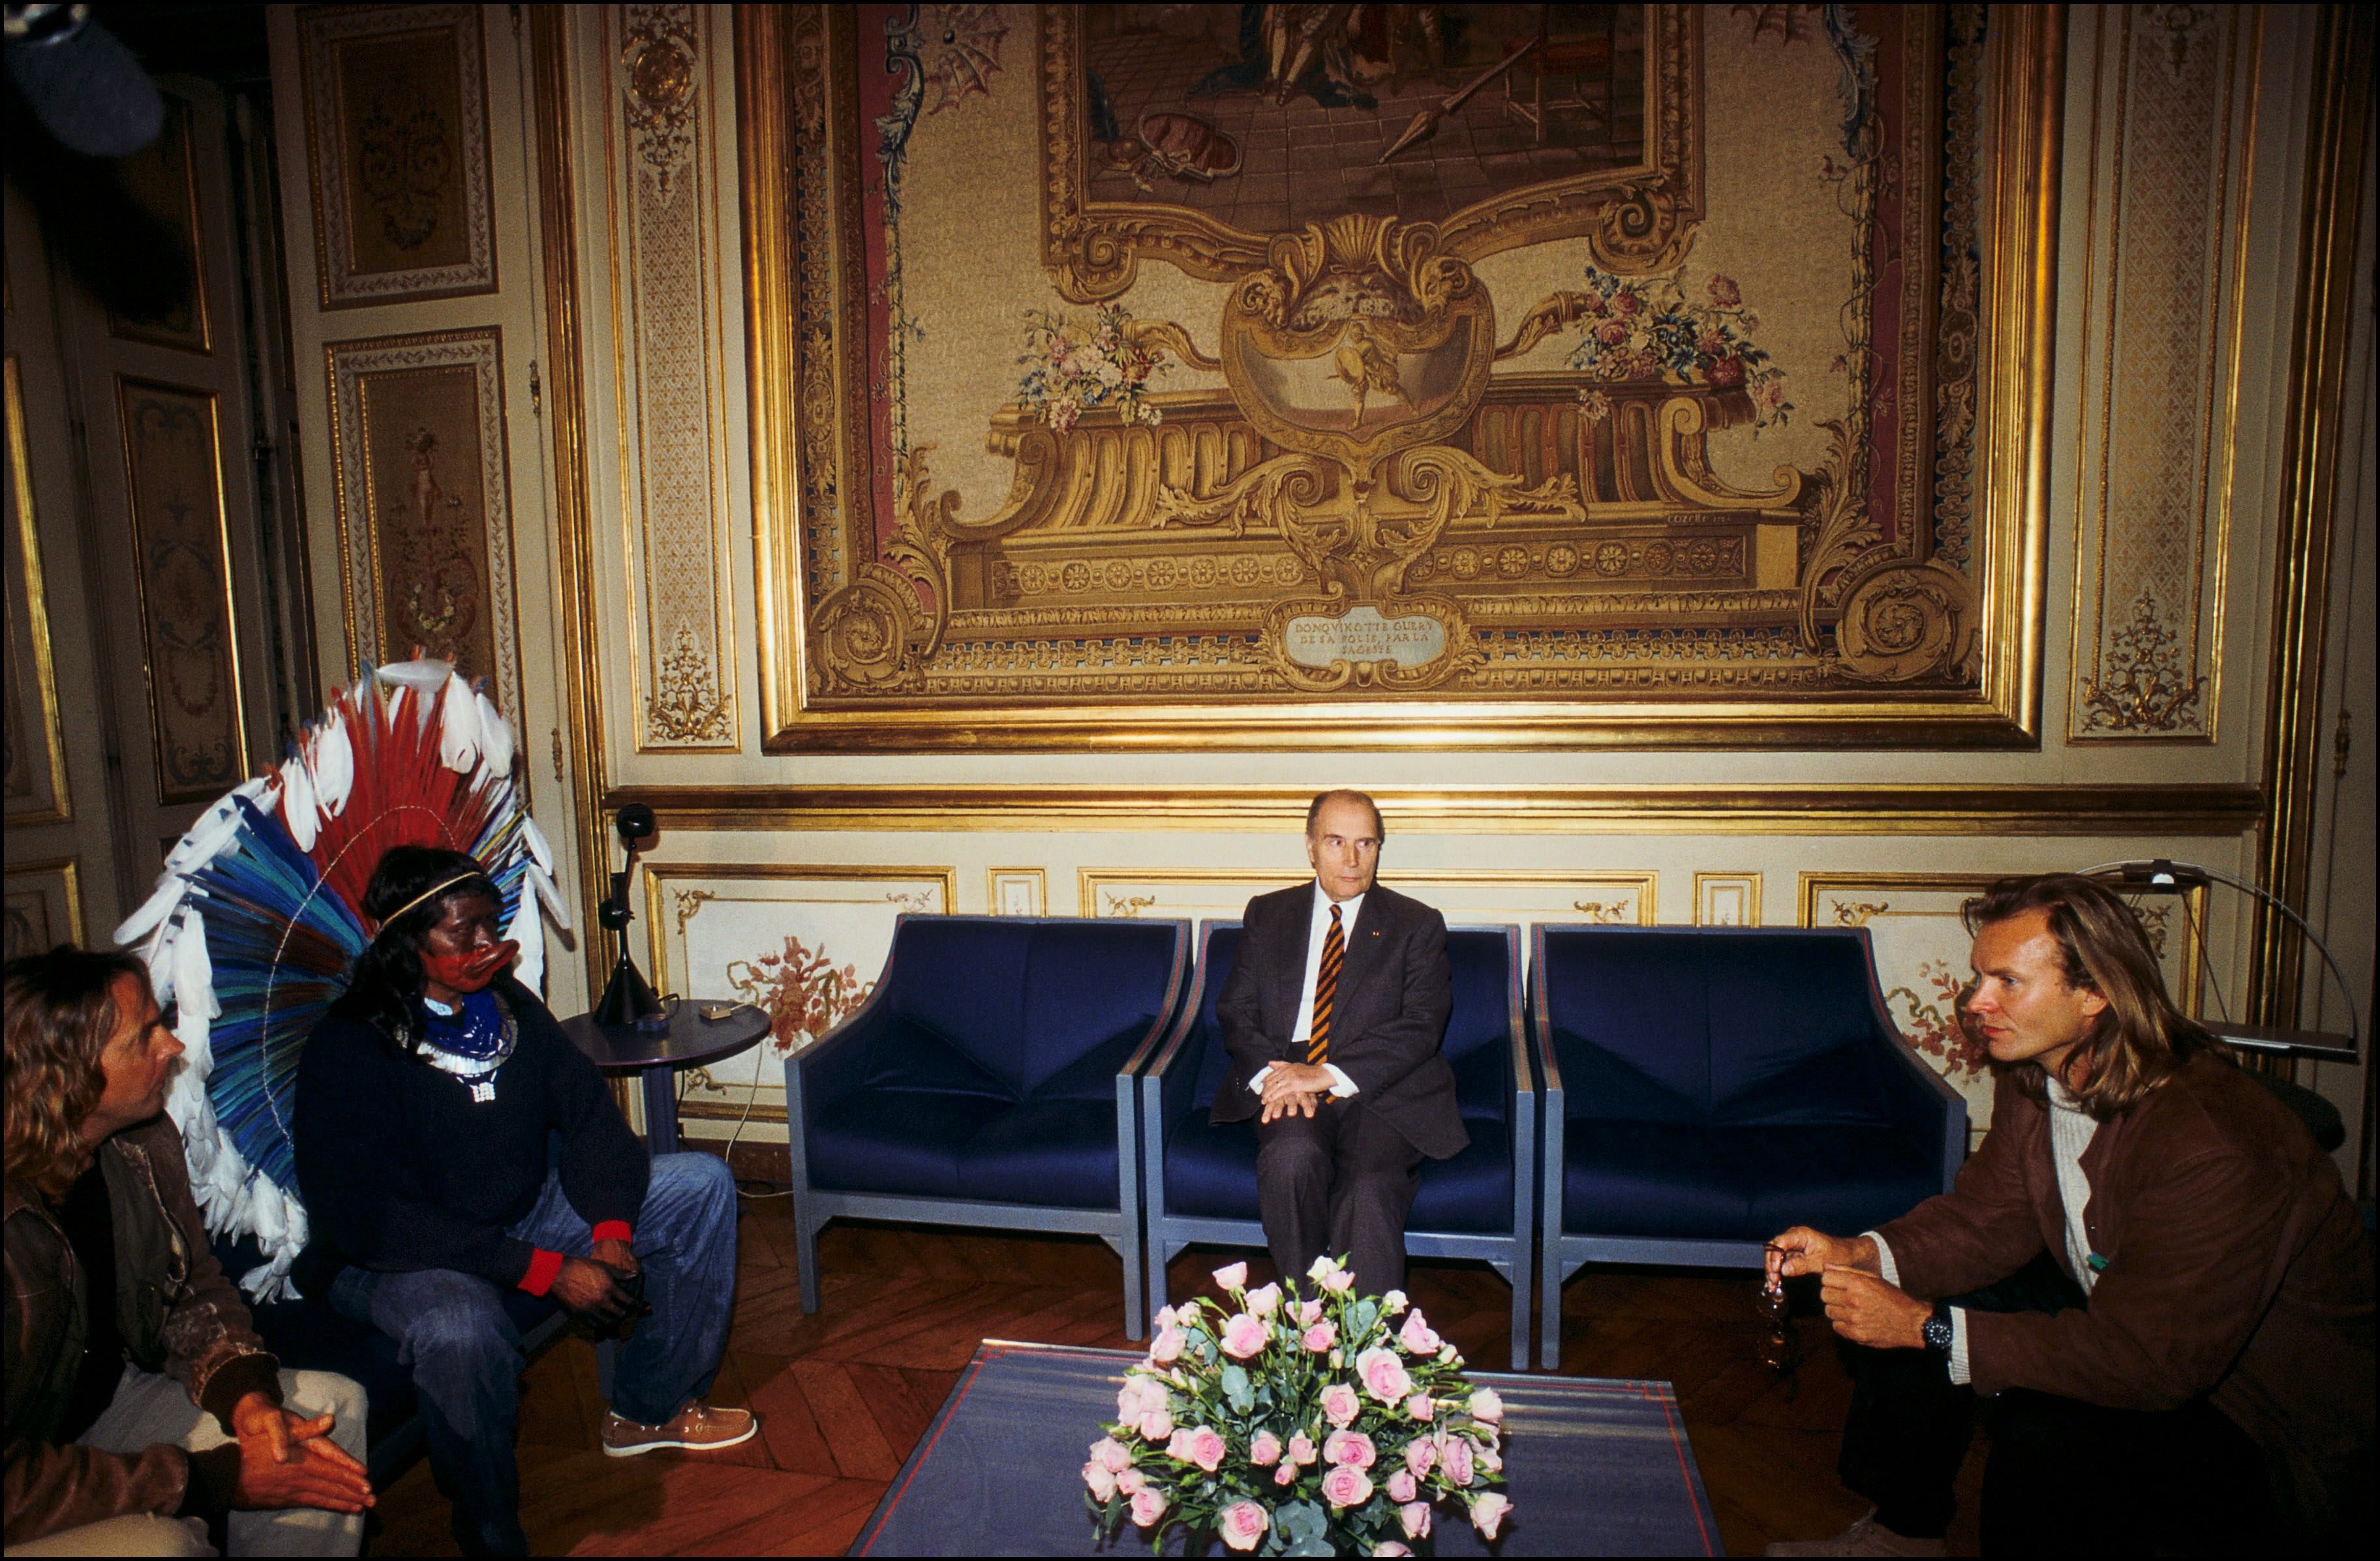 Jean-Pierre Dutilleux, Chief Raoni, Francois Mitterrand, and Sting sitting